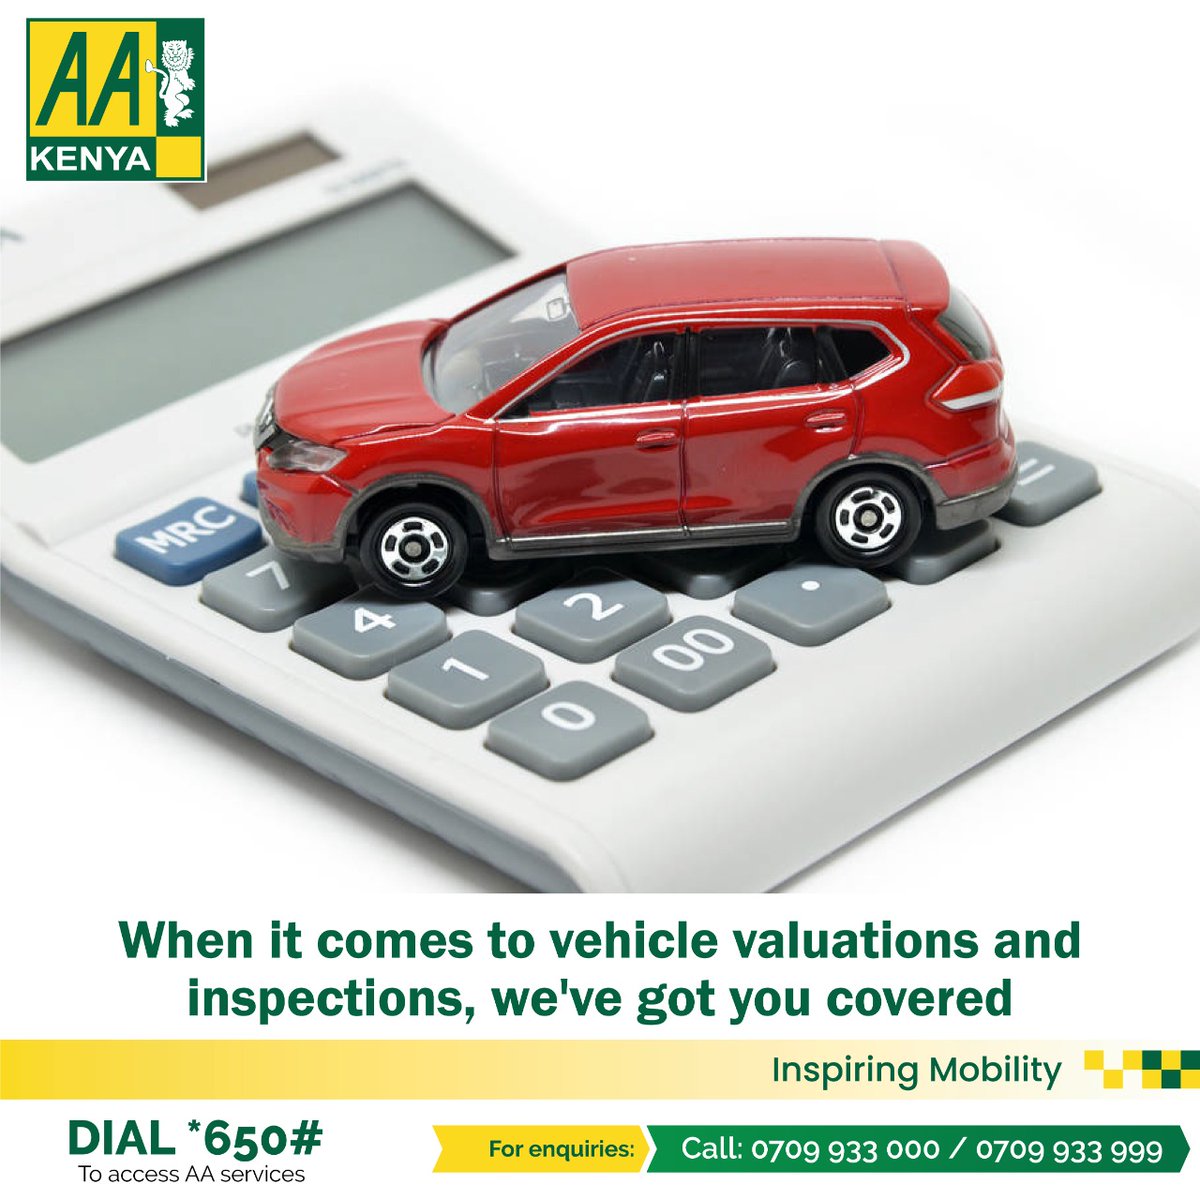 Get the most out of your vehicle with AA Kenya’s professional vehicle valuation and inspection services. Trust our experts to give you the information you need to make the right decision. For more info, call us on 0709933000/999
#AAKenyacares #InspiringMobility